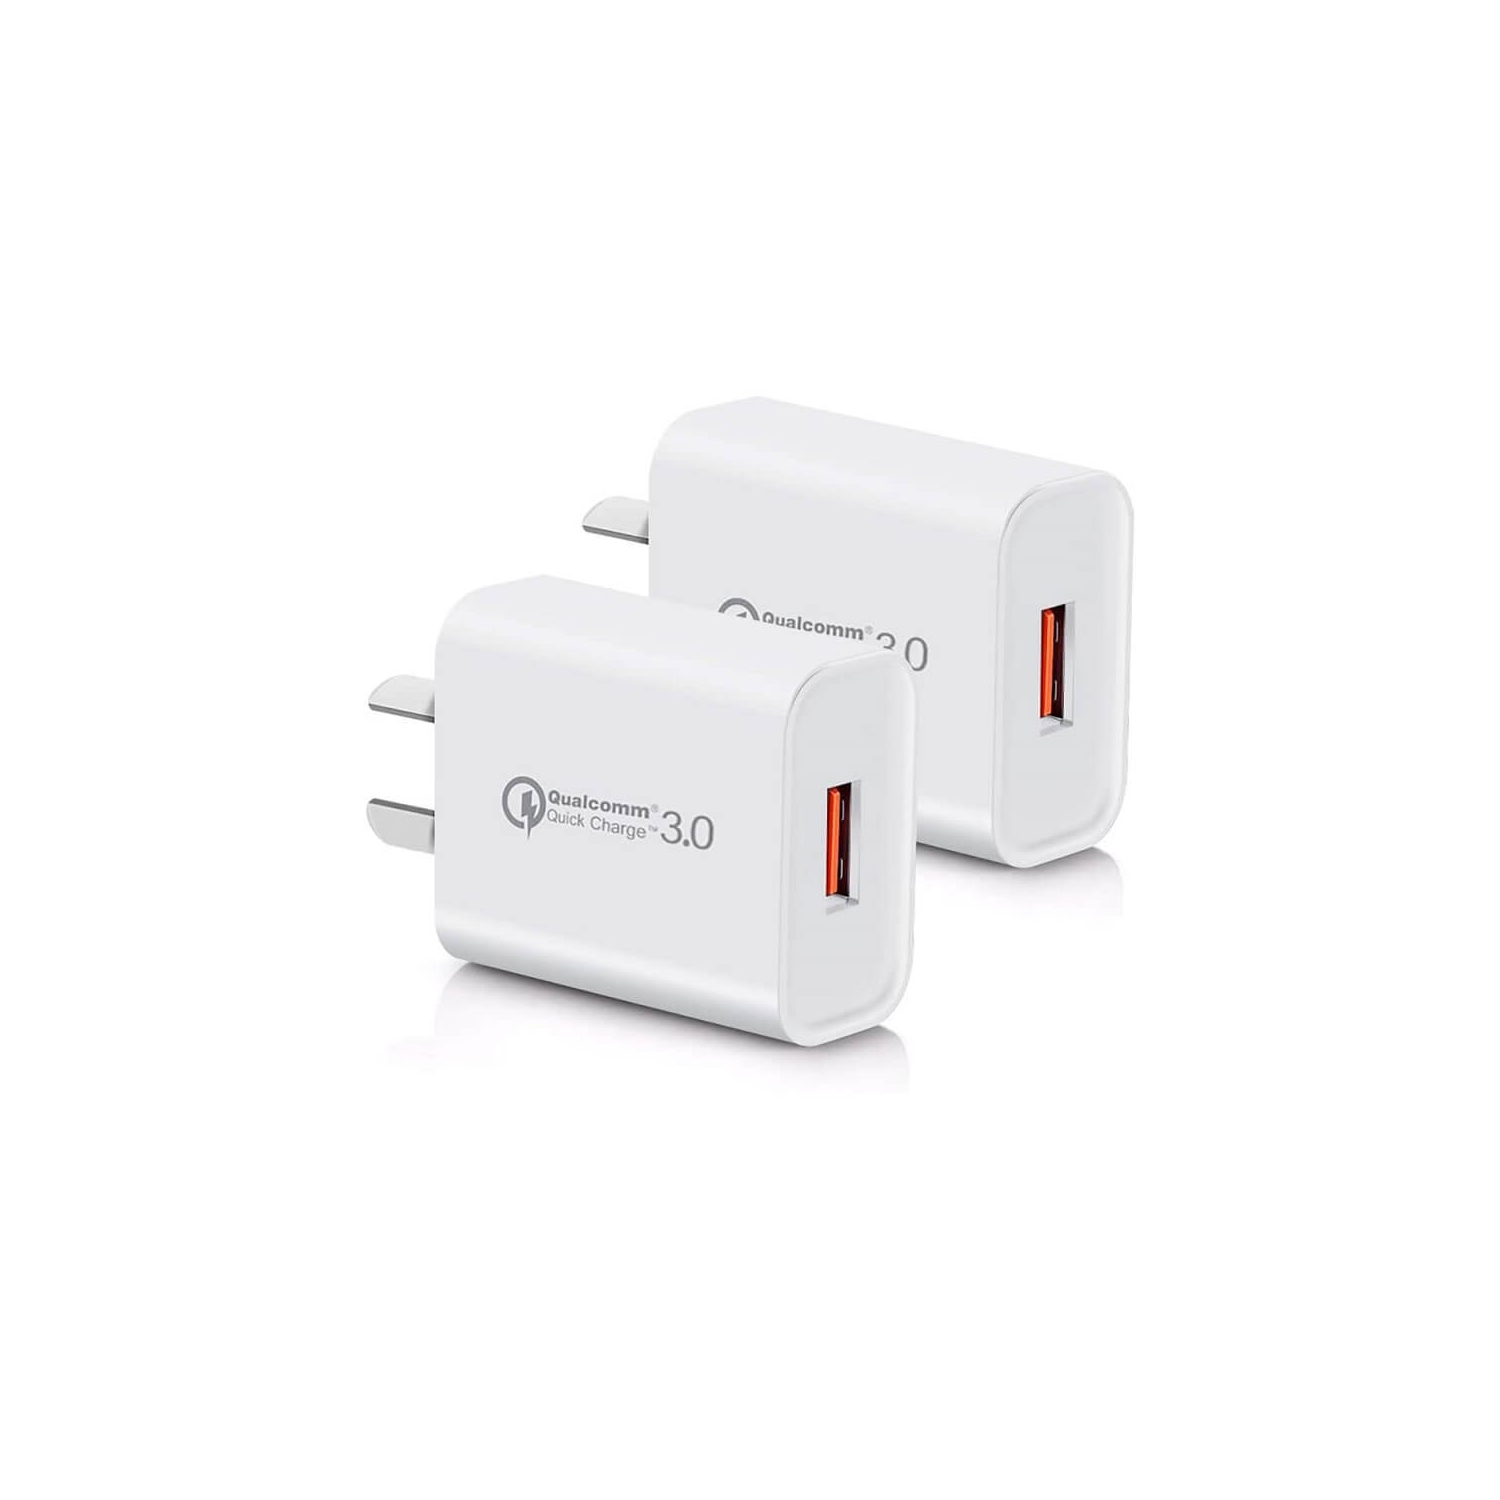 Wall Charger Qualcomm Quick Charge QC 3.0 Universal Super Fast USB 18W Cell Phone Charging Adapter Wall Plug For Samsung iPhone iPad Airpod Huawei LG Nokia Motorola